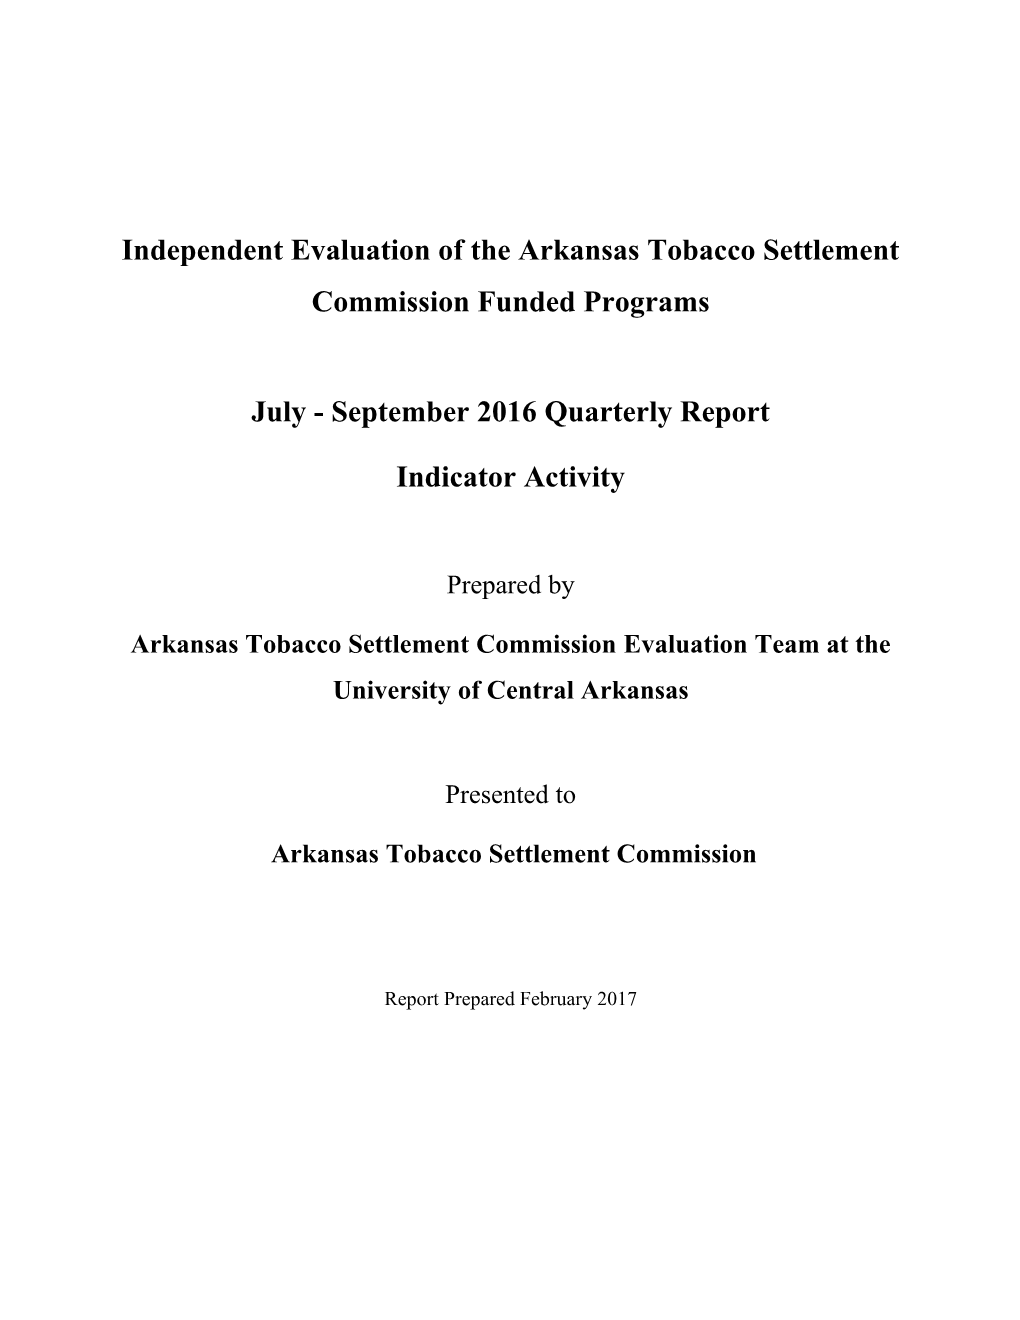 Independent Evaluation of the Arkansas Tobacco Settlement Commission Funded Programs